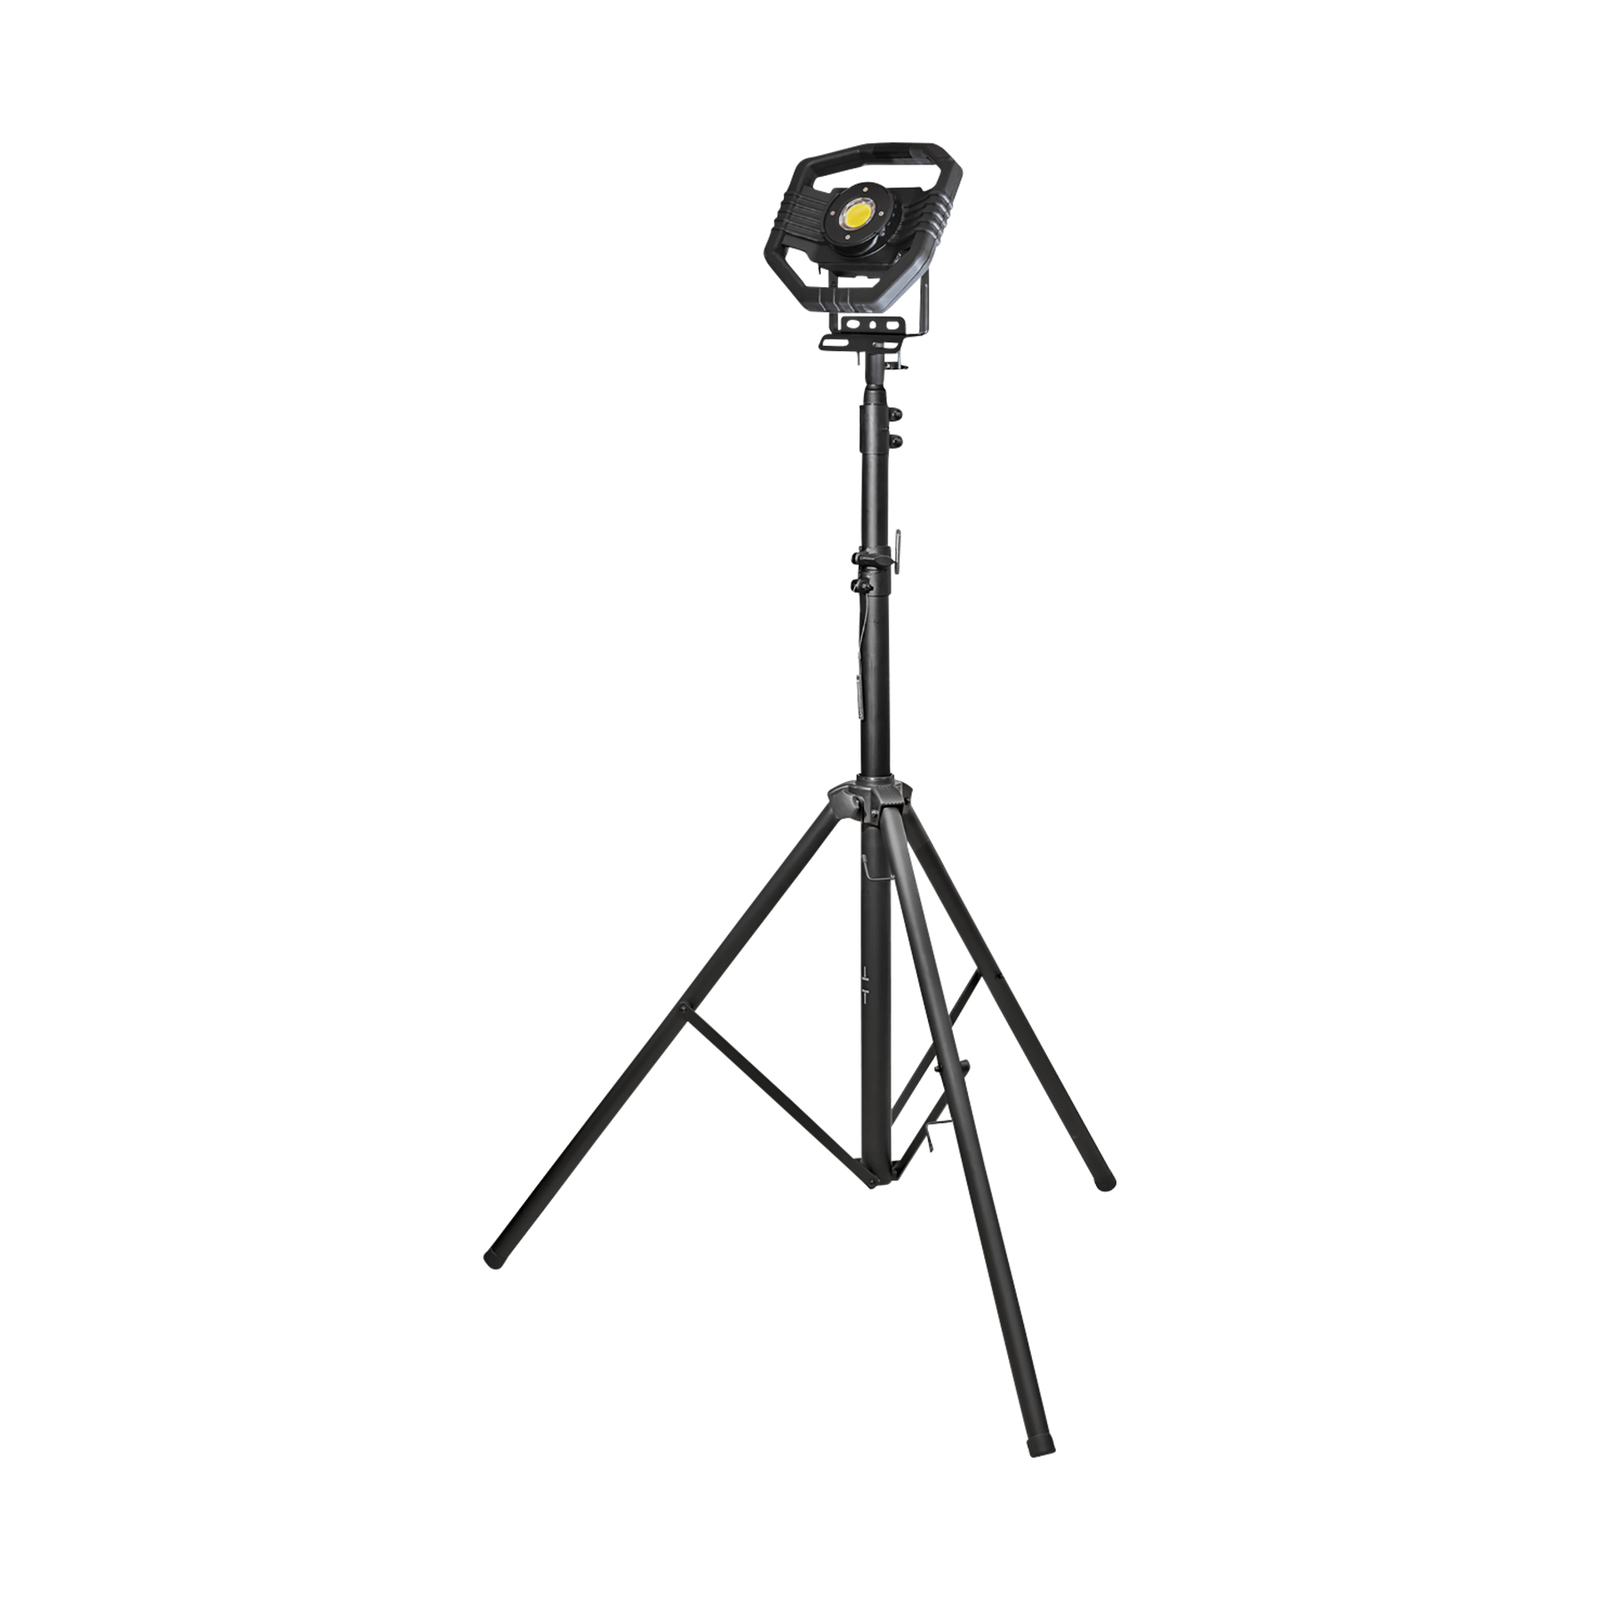 TS 300 telescopic stand for R23050 floodlight